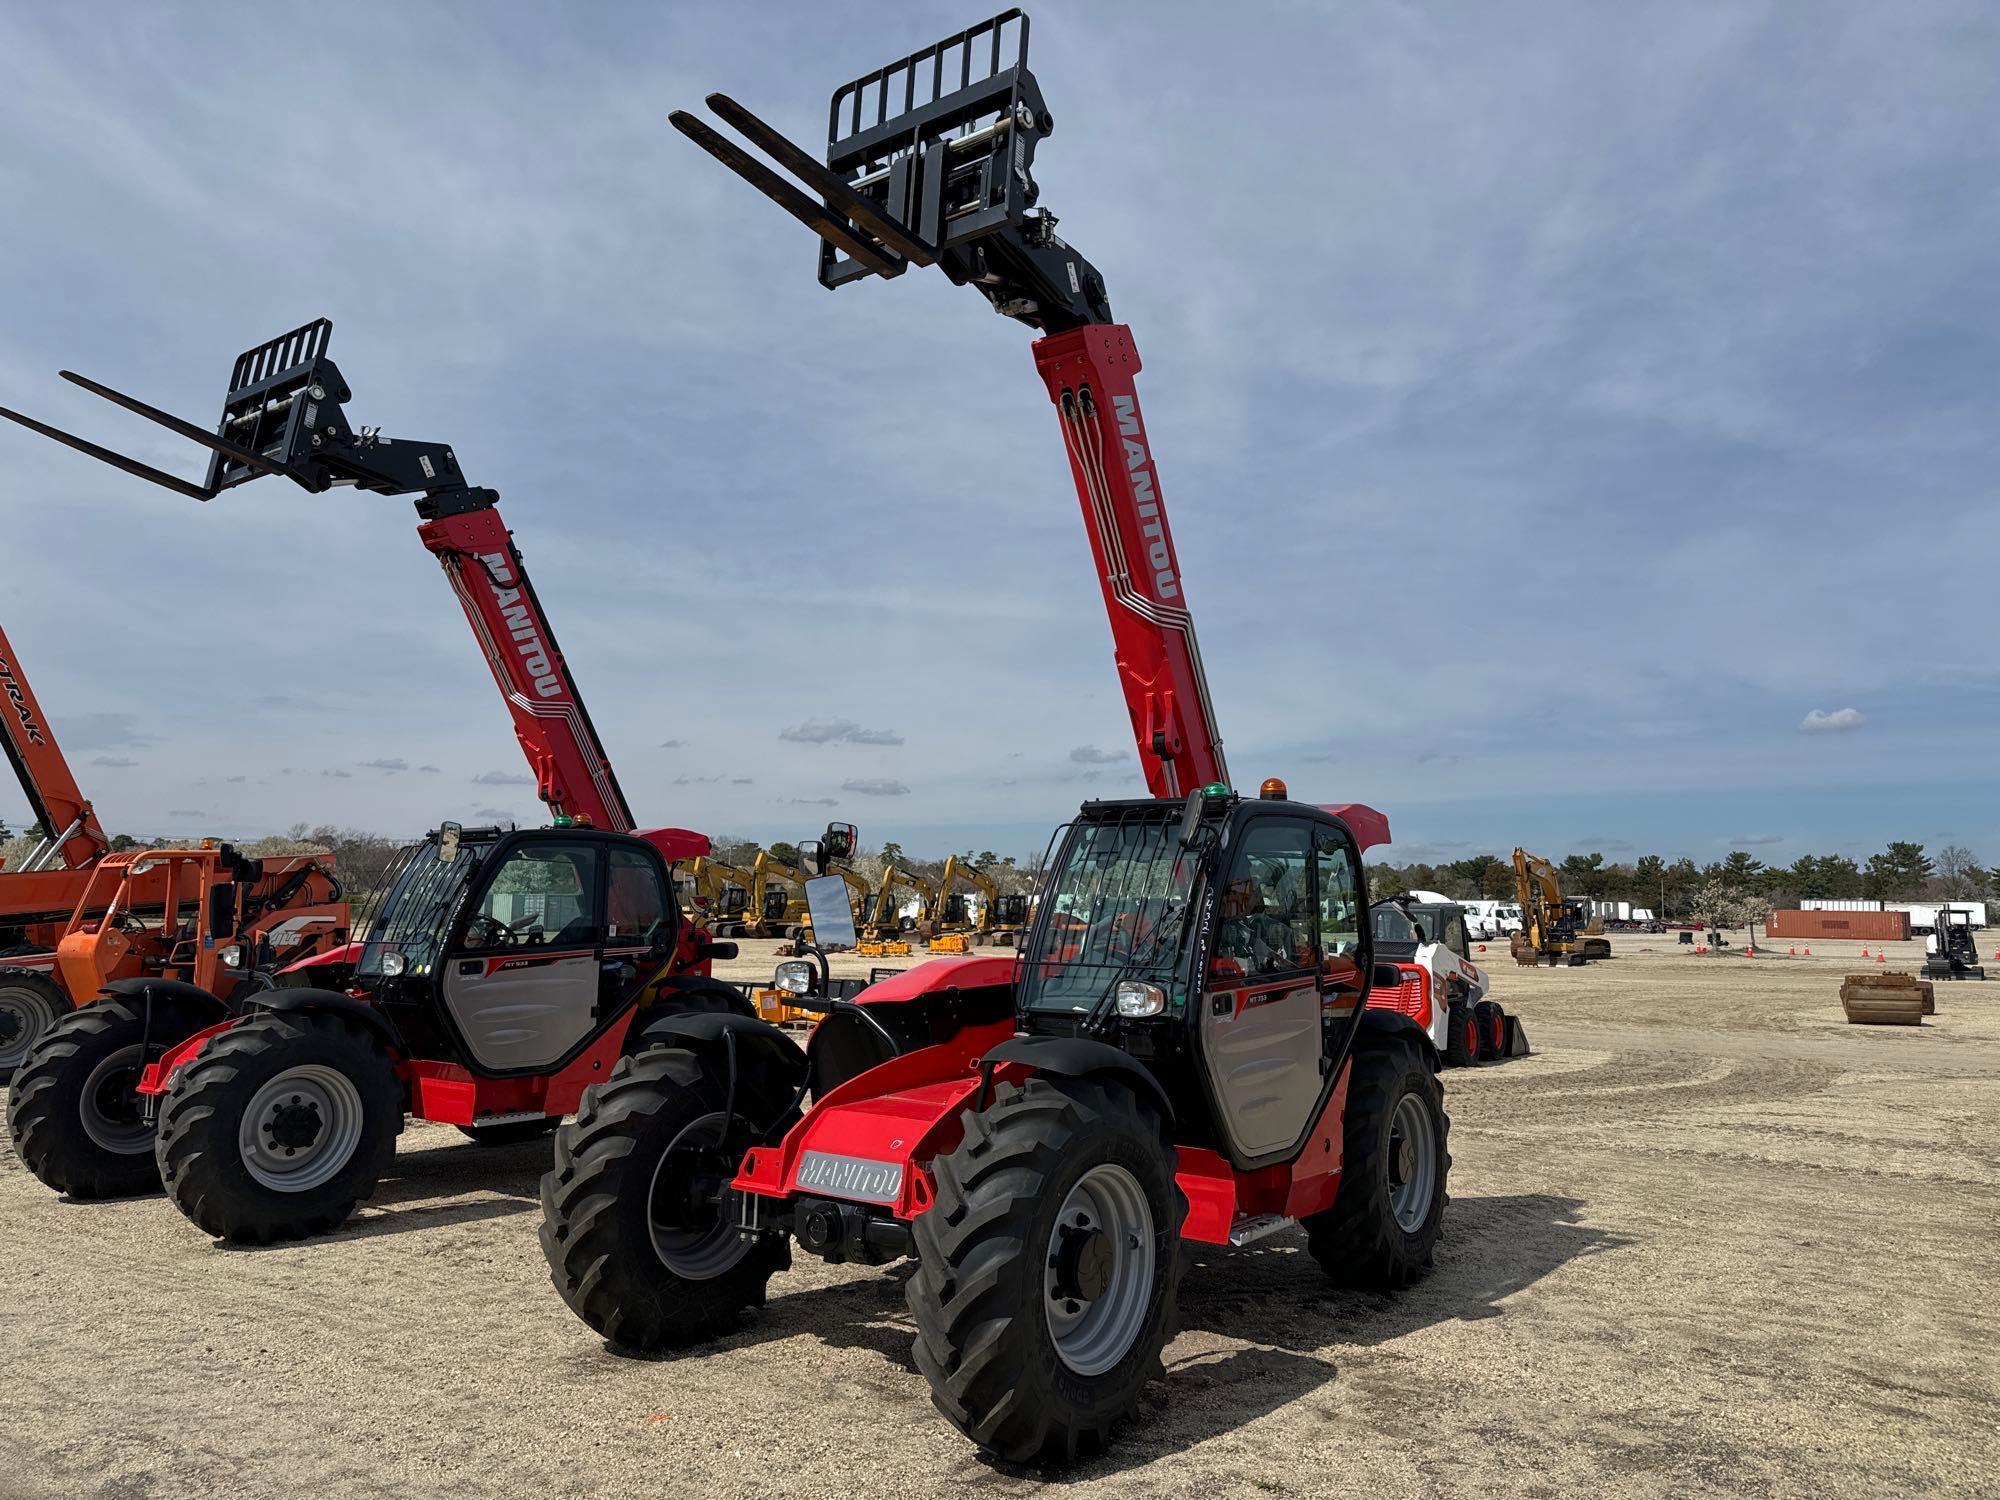 NEW UNUSED MANITOU MT733 EASY TELESCOPIC FORKLIFT 4x4, powered by diesel engine, equipped with